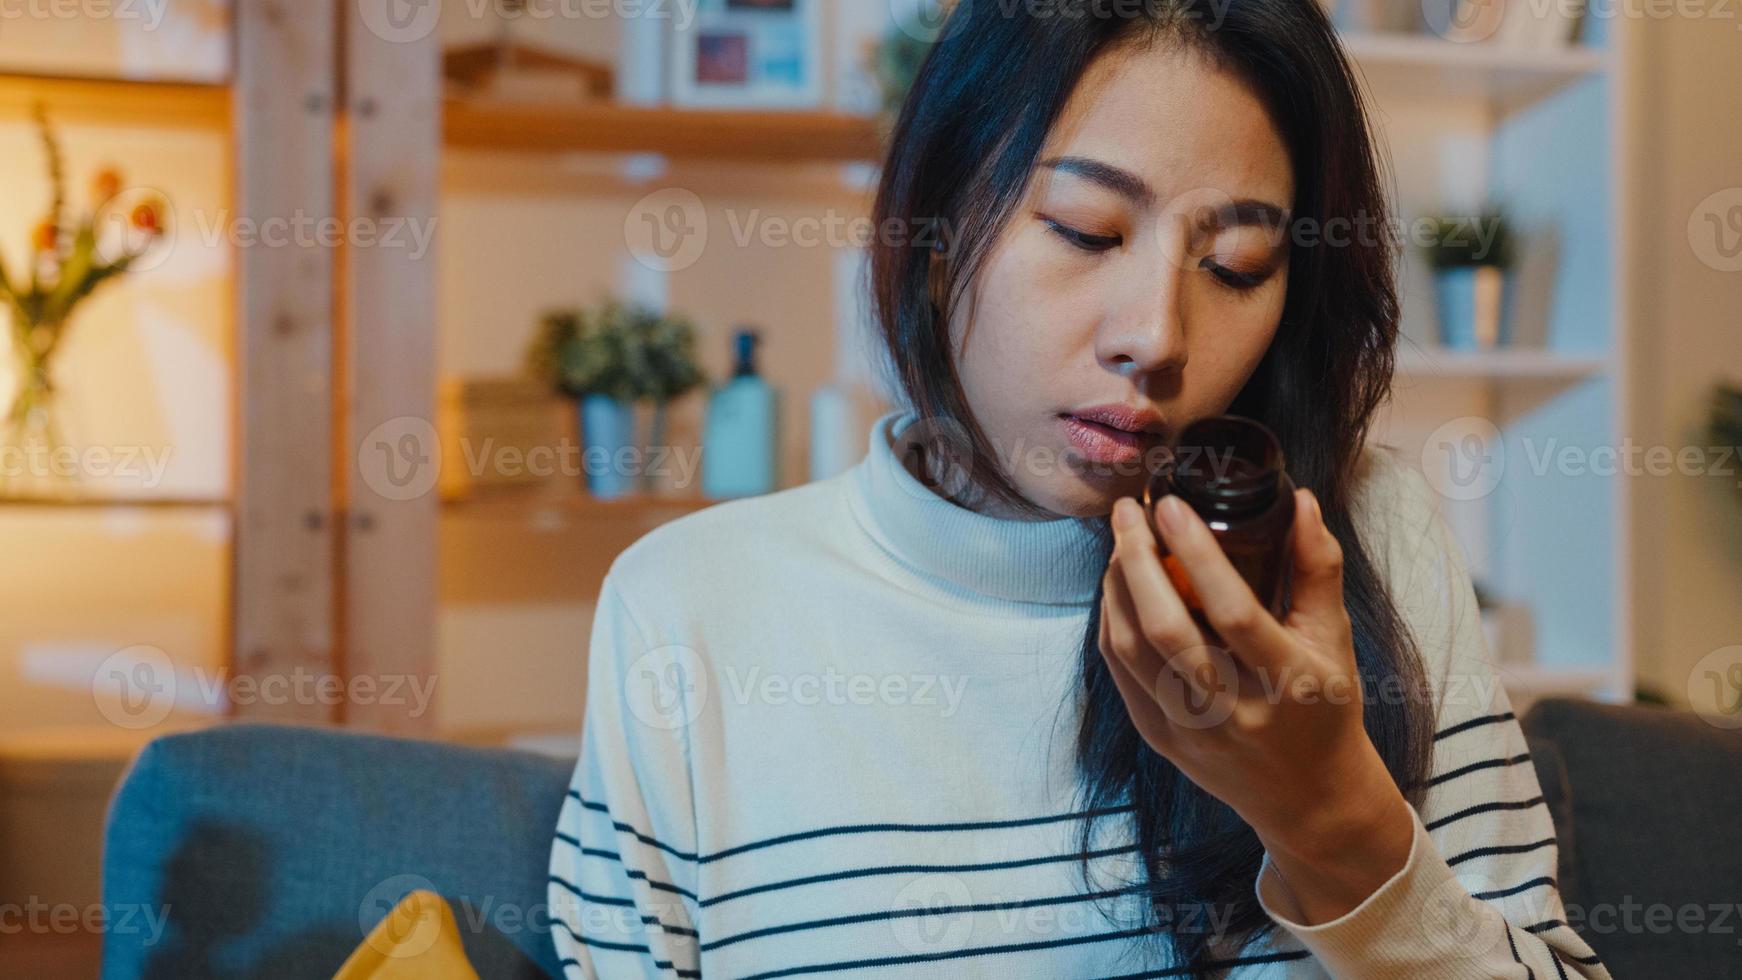 Sick asian young lady holding pill take a look medicine sit on couch at home night. Girl taking medicine after doctor order, quarantine at home, Coronavirus social distancing healthcare concept. photo